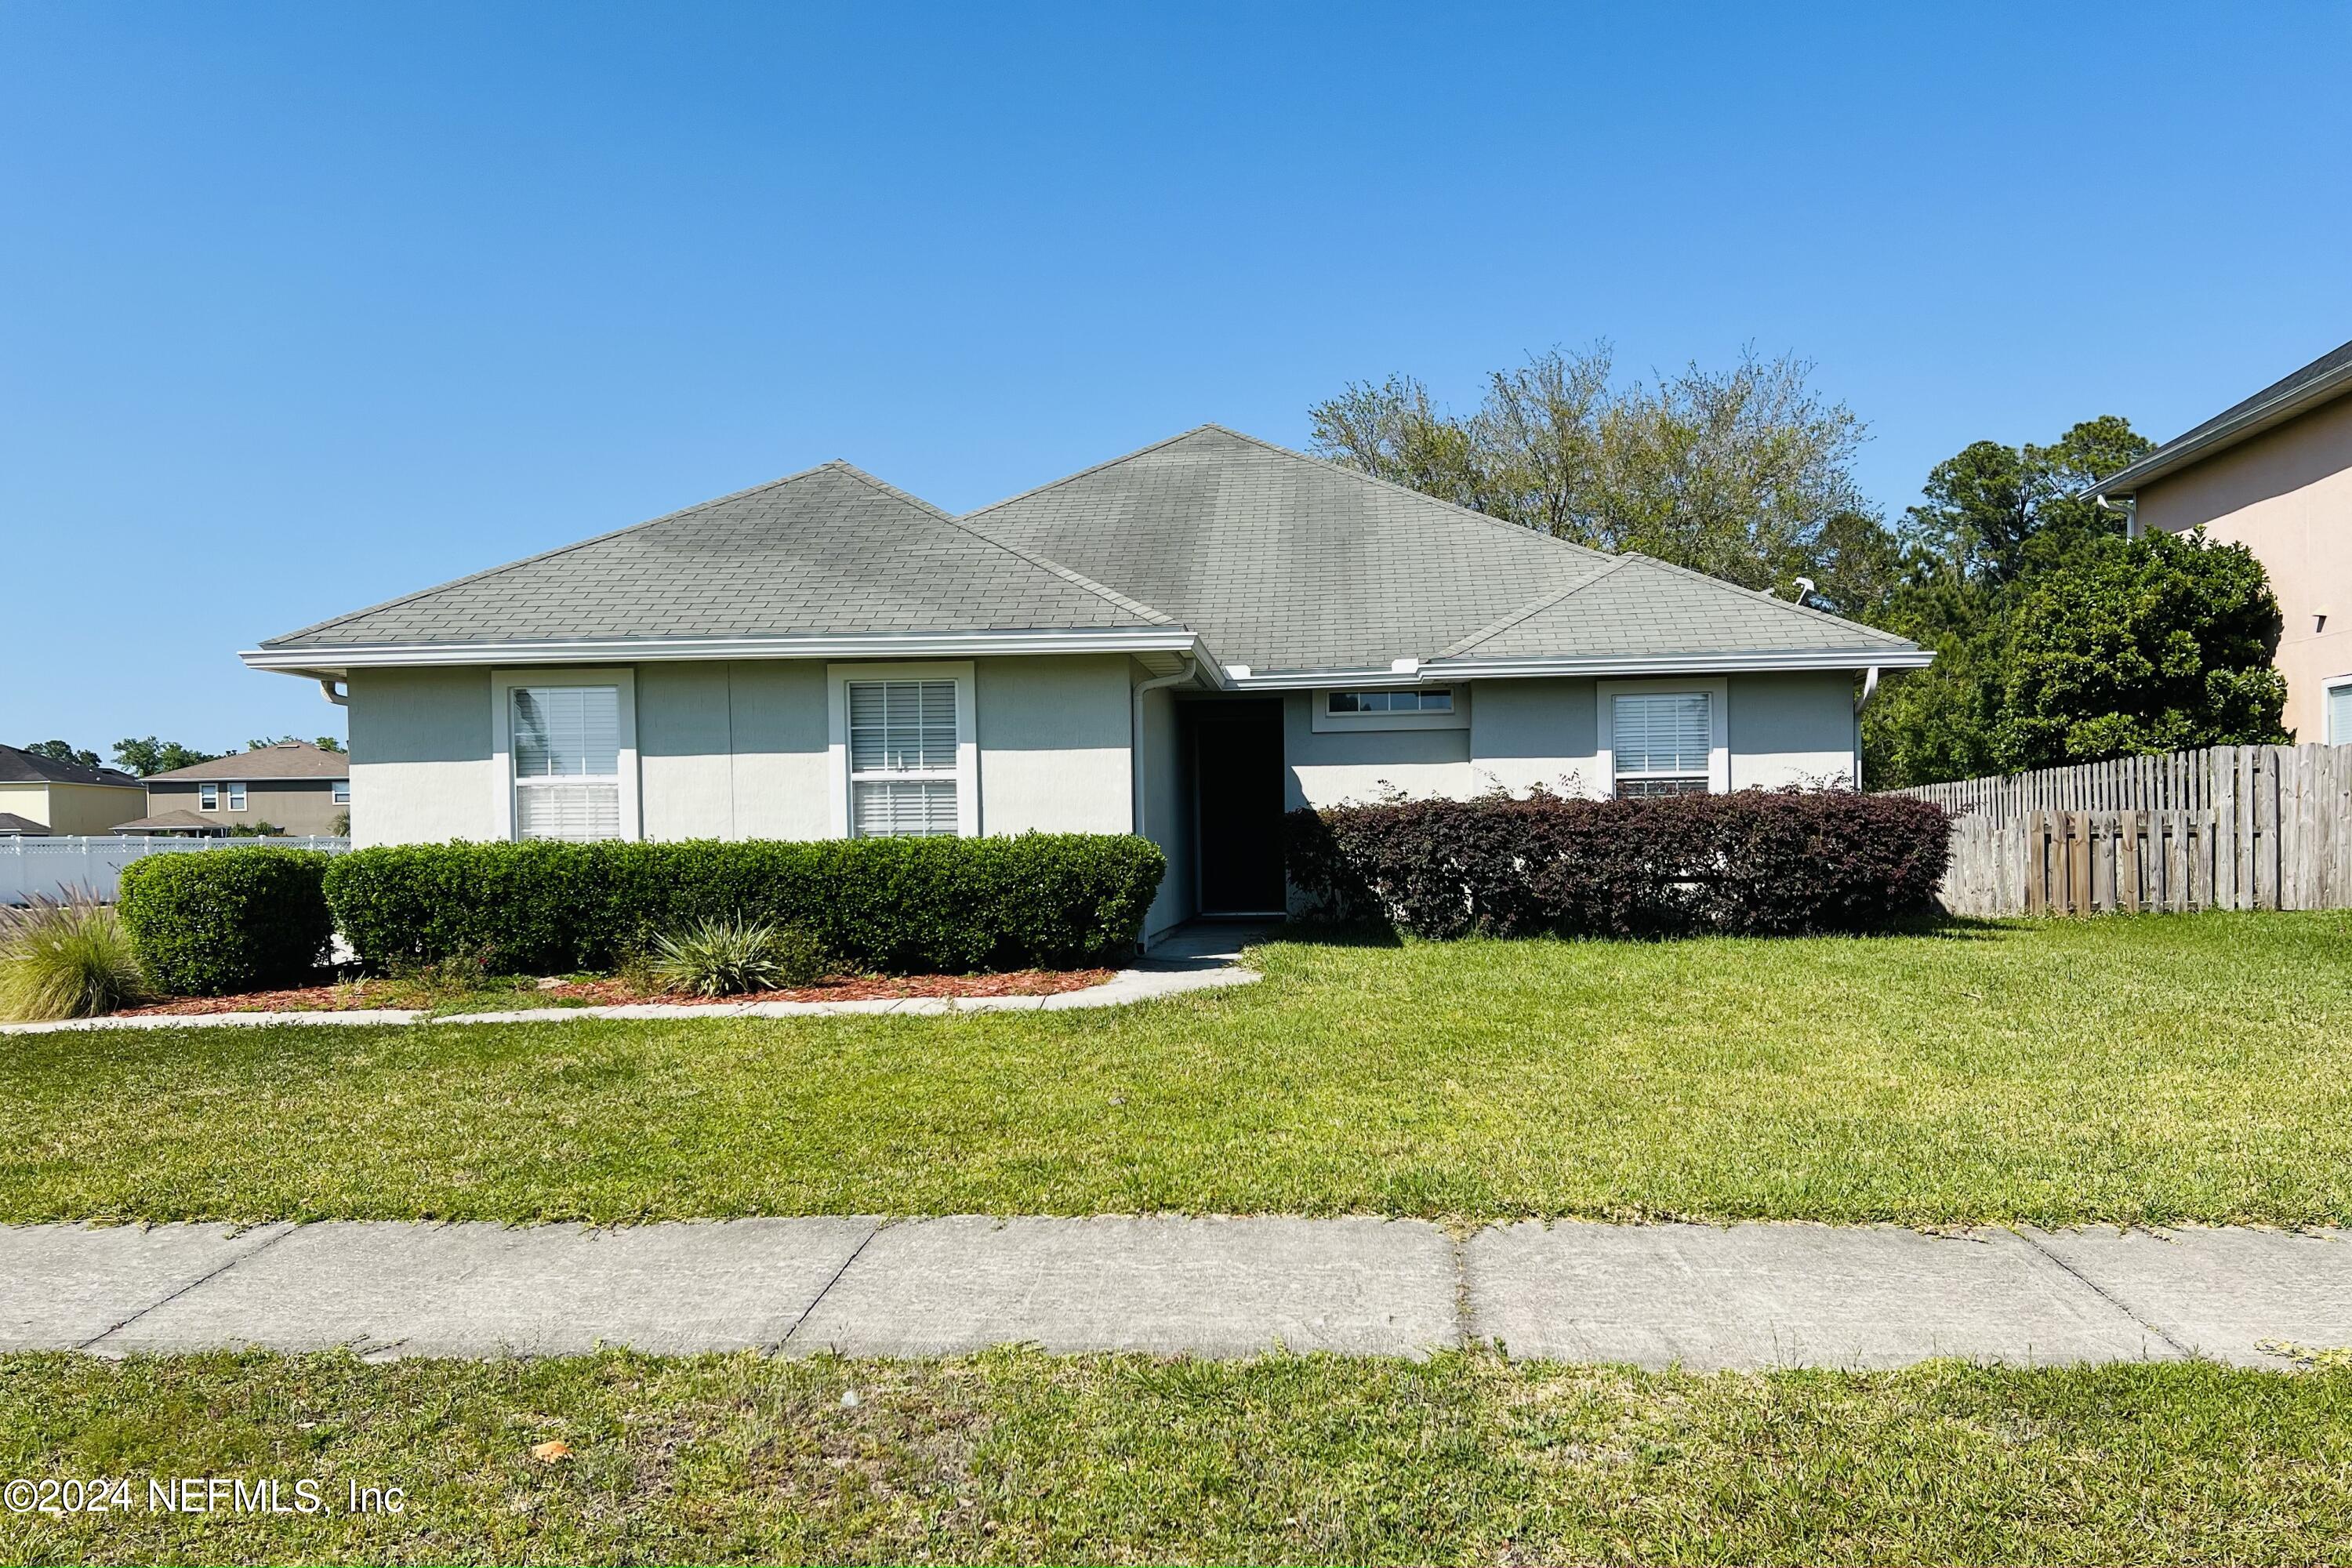 Middleburg, FL home for sale located at 1657 Hollow Glen Drive, Middleburg, FL 32068